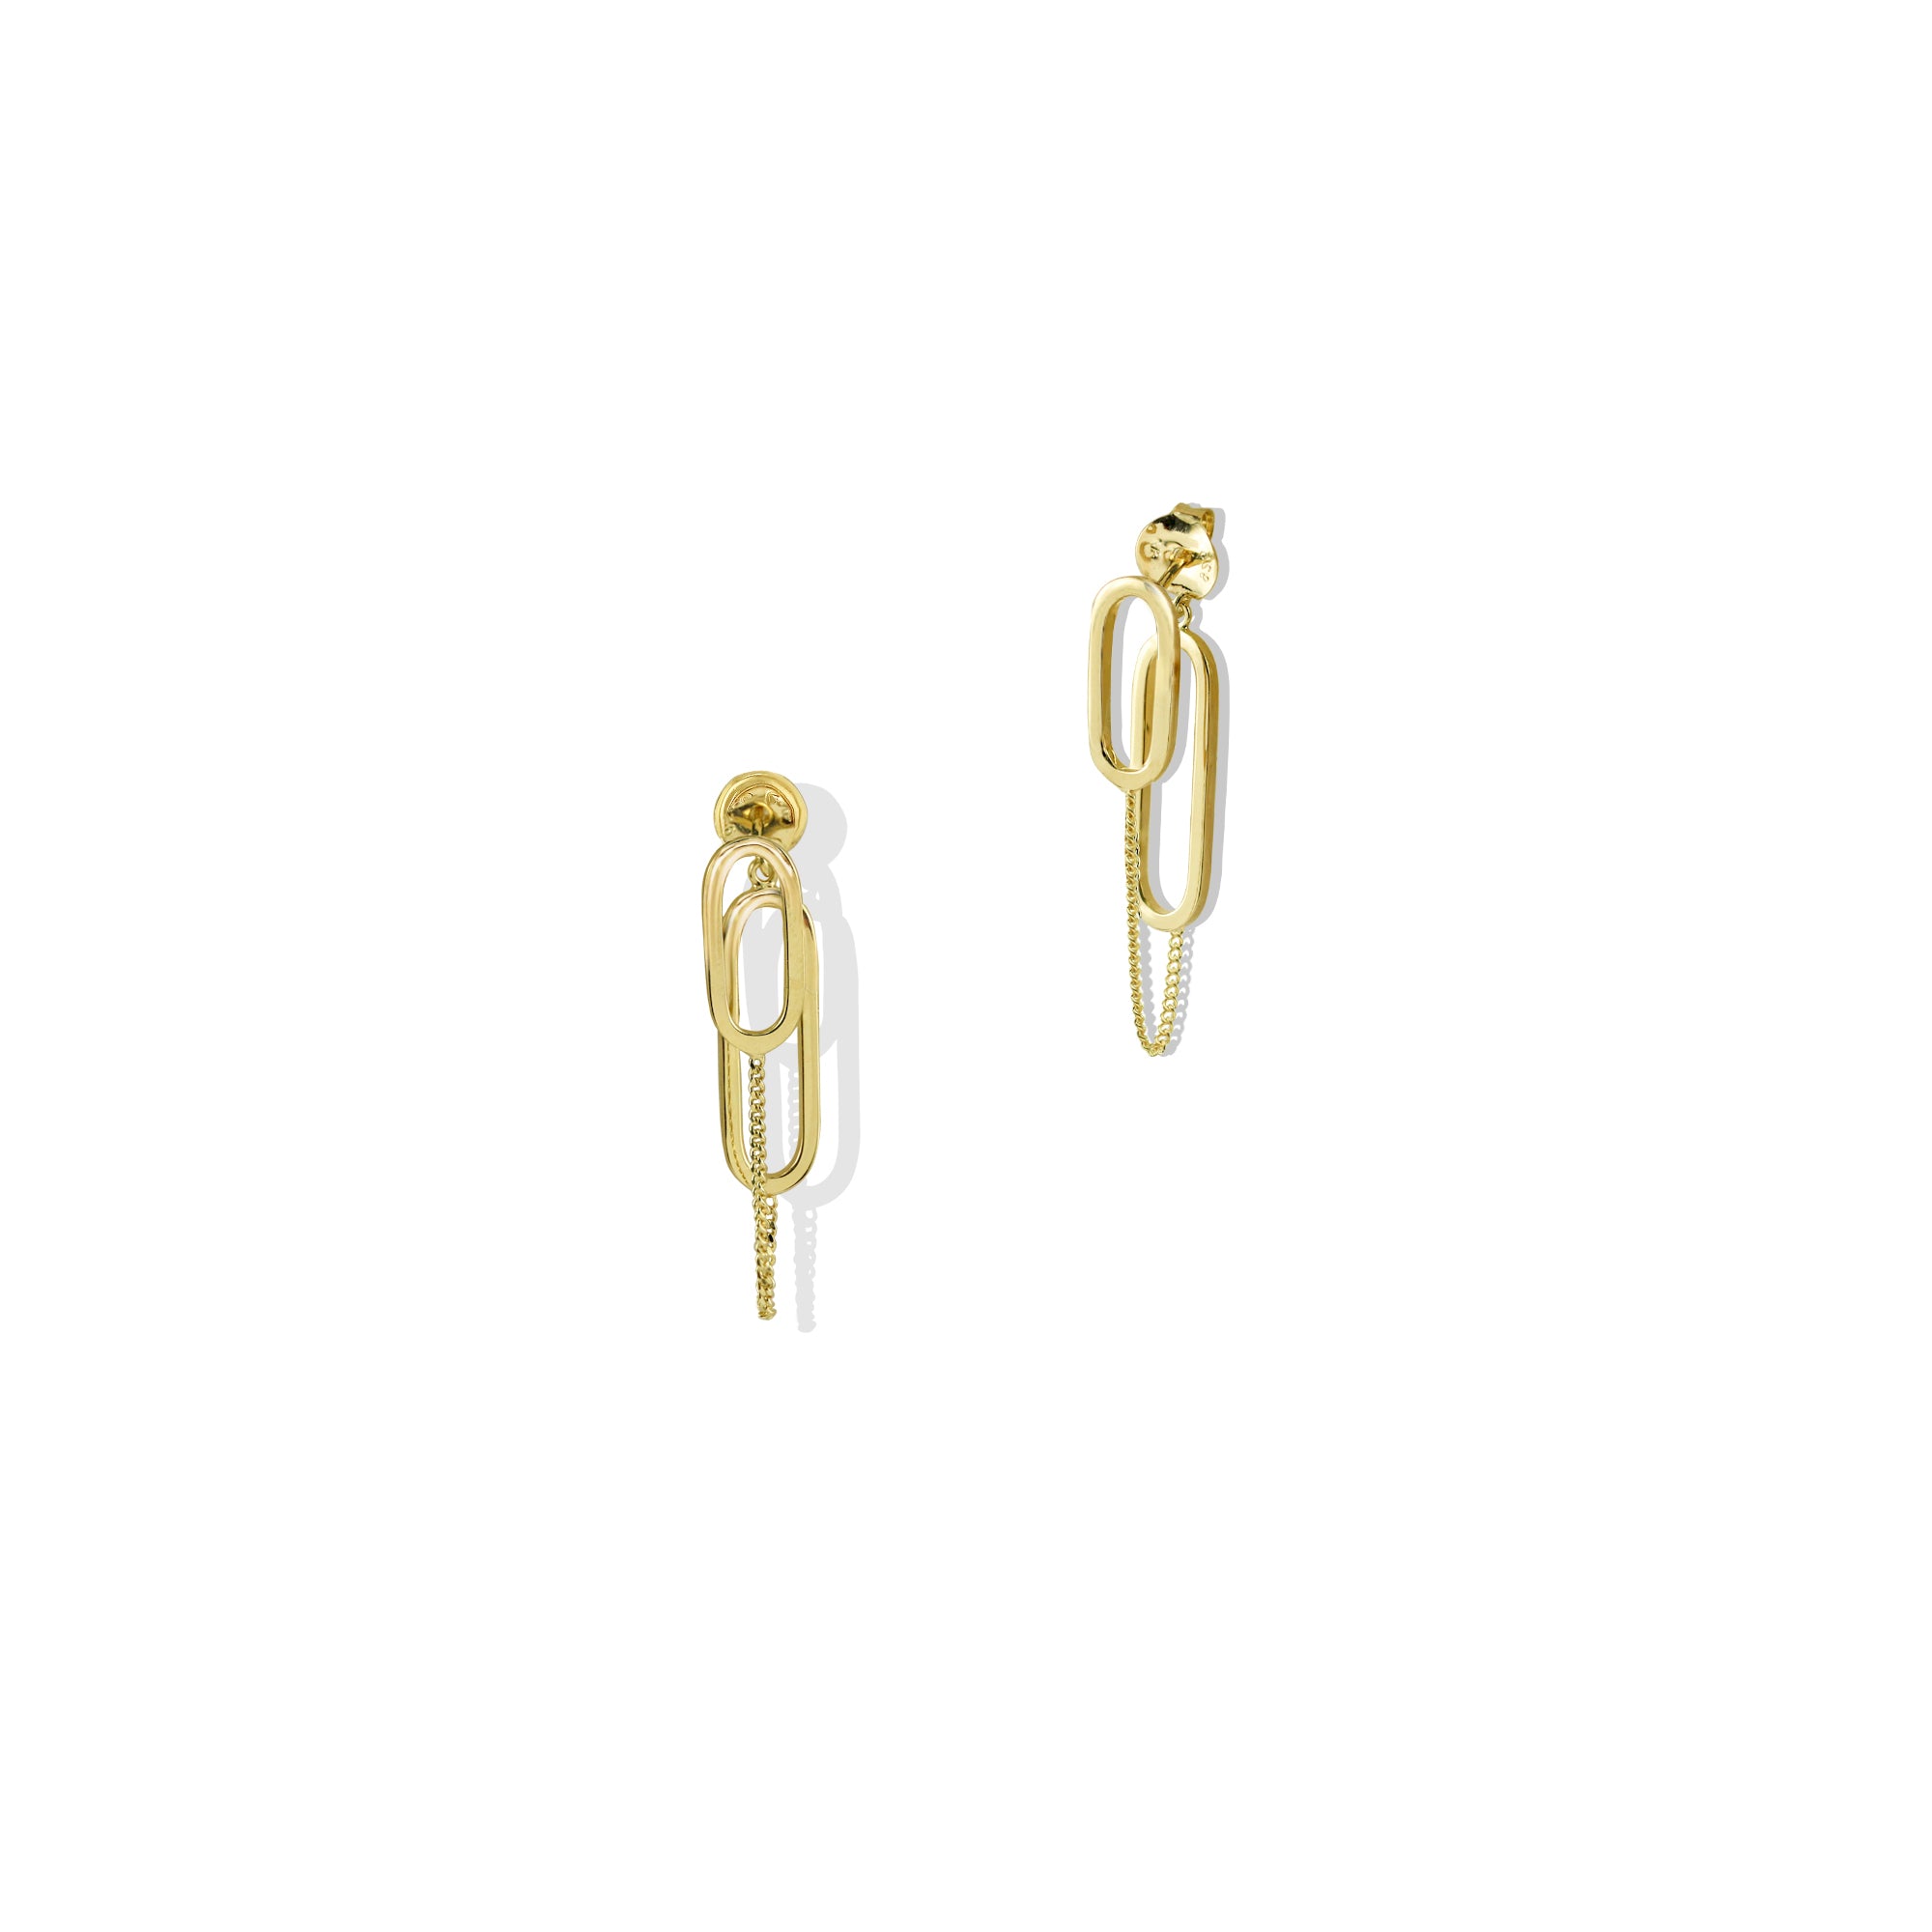 THE CHAINED PAPERCLIP EARRING